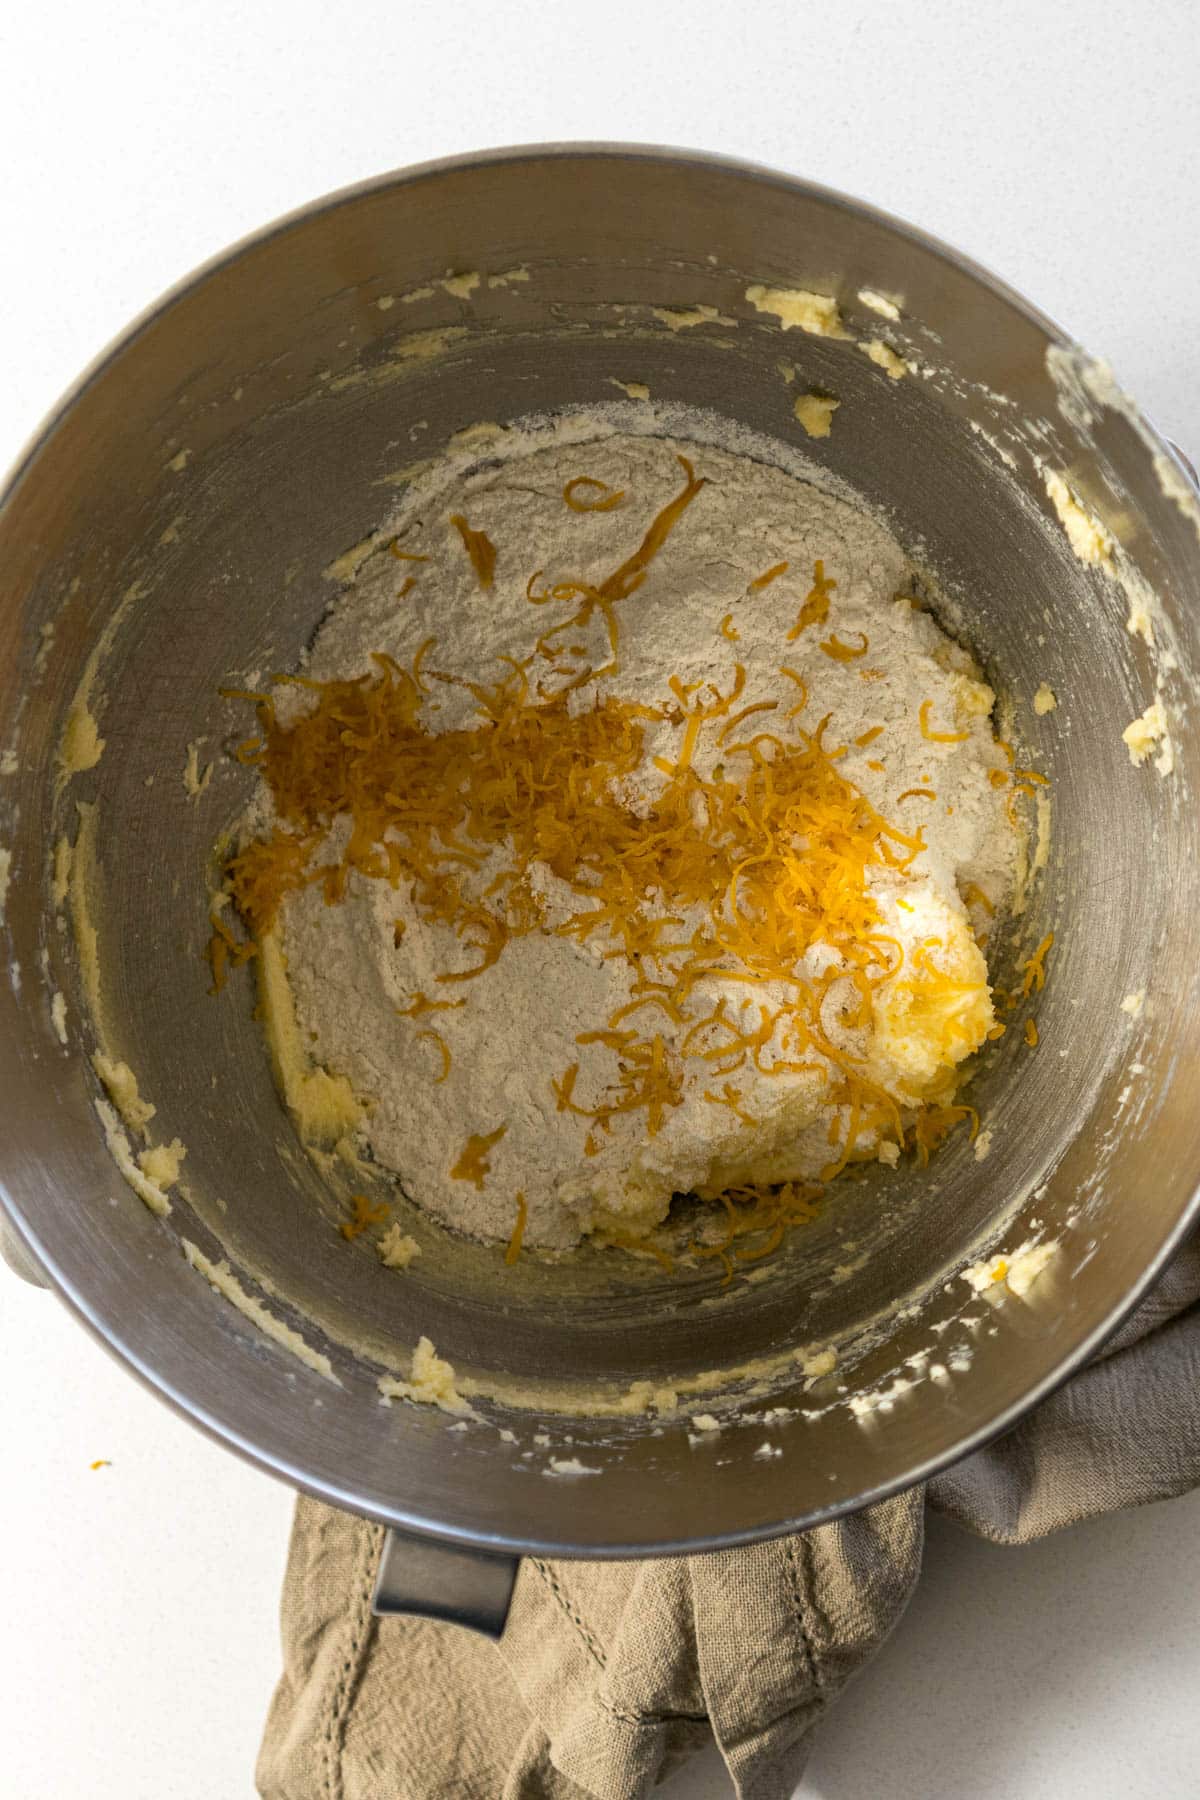 Dry ingredients added to the creamed butter and sugars.